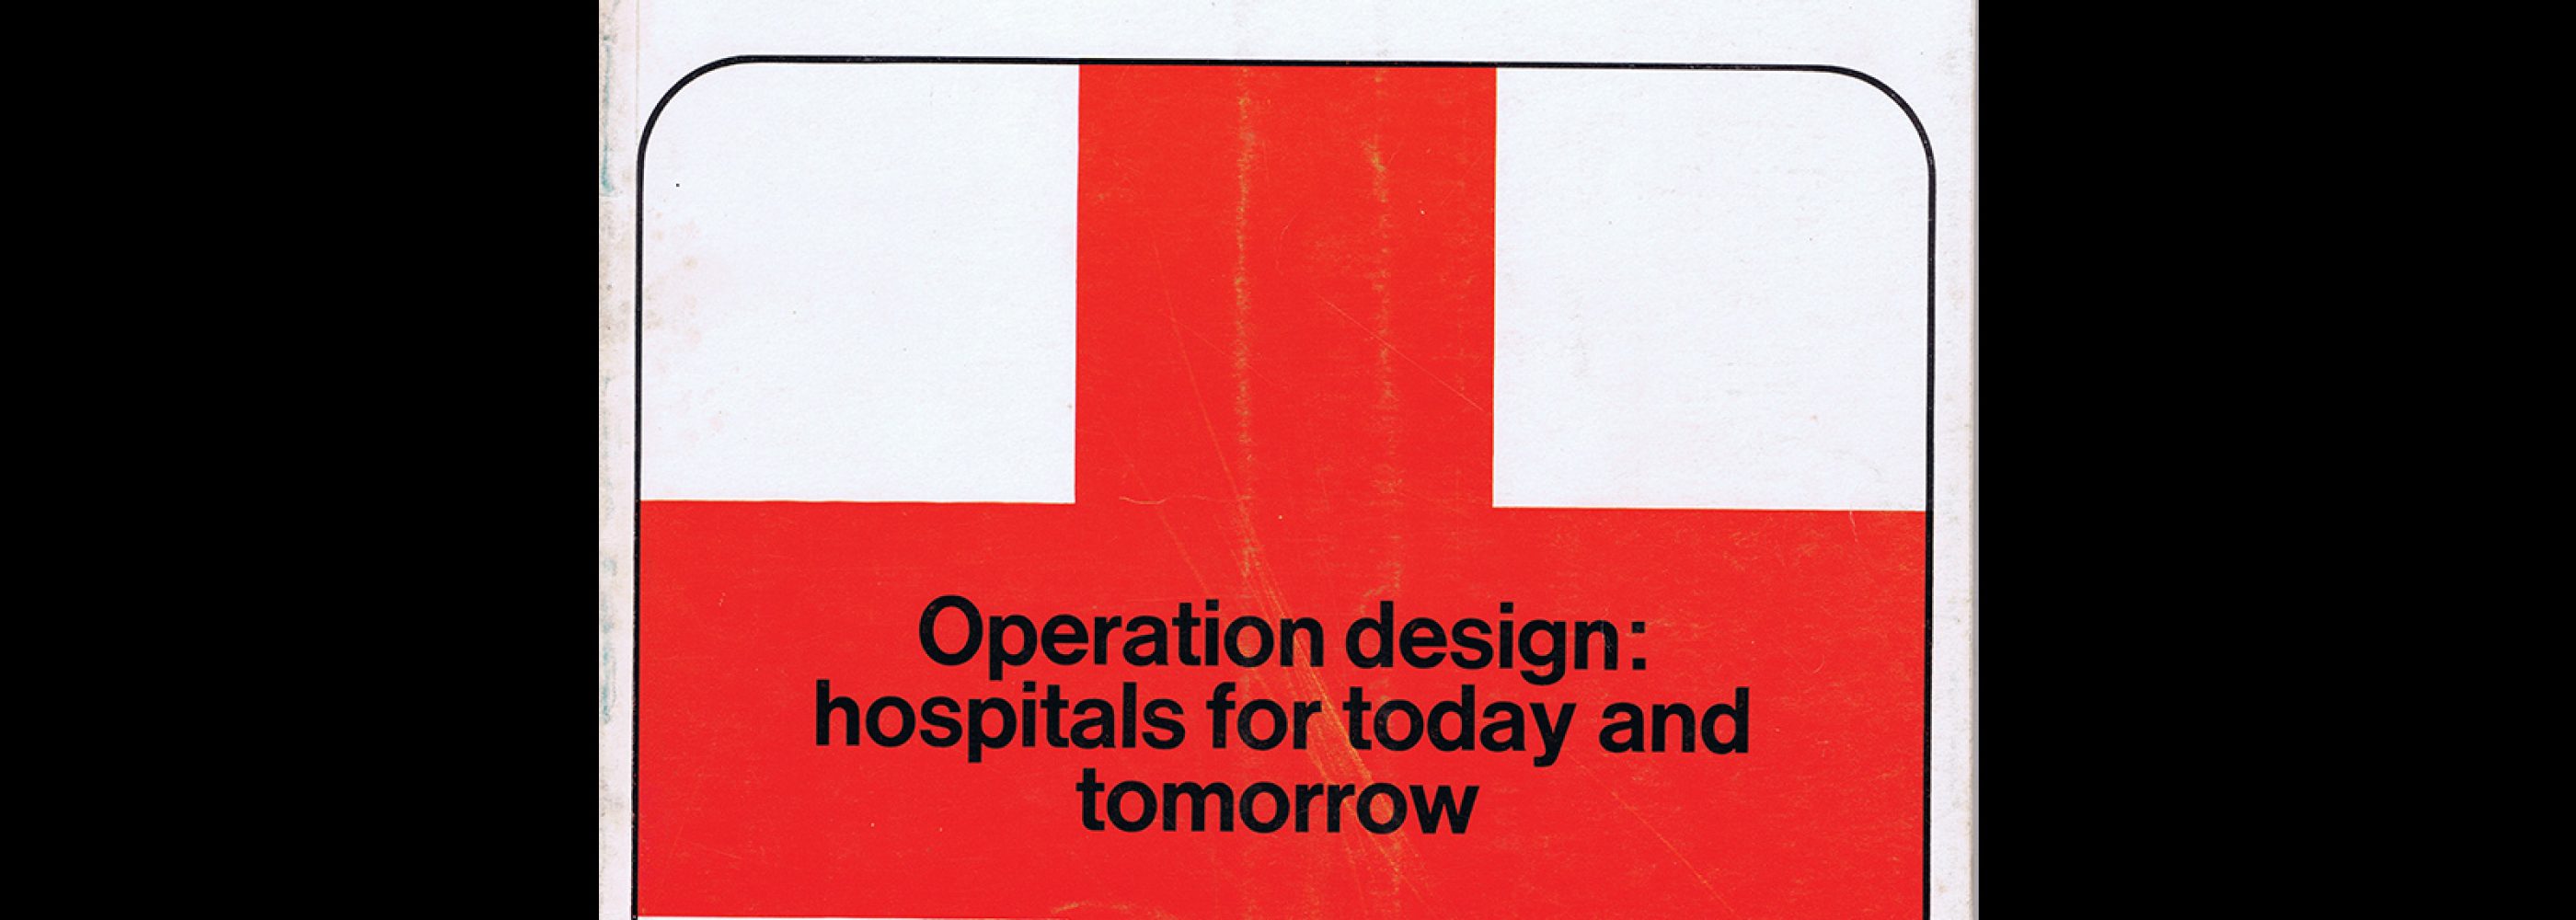 Design, Council of Industrial Design, 207, March 1966